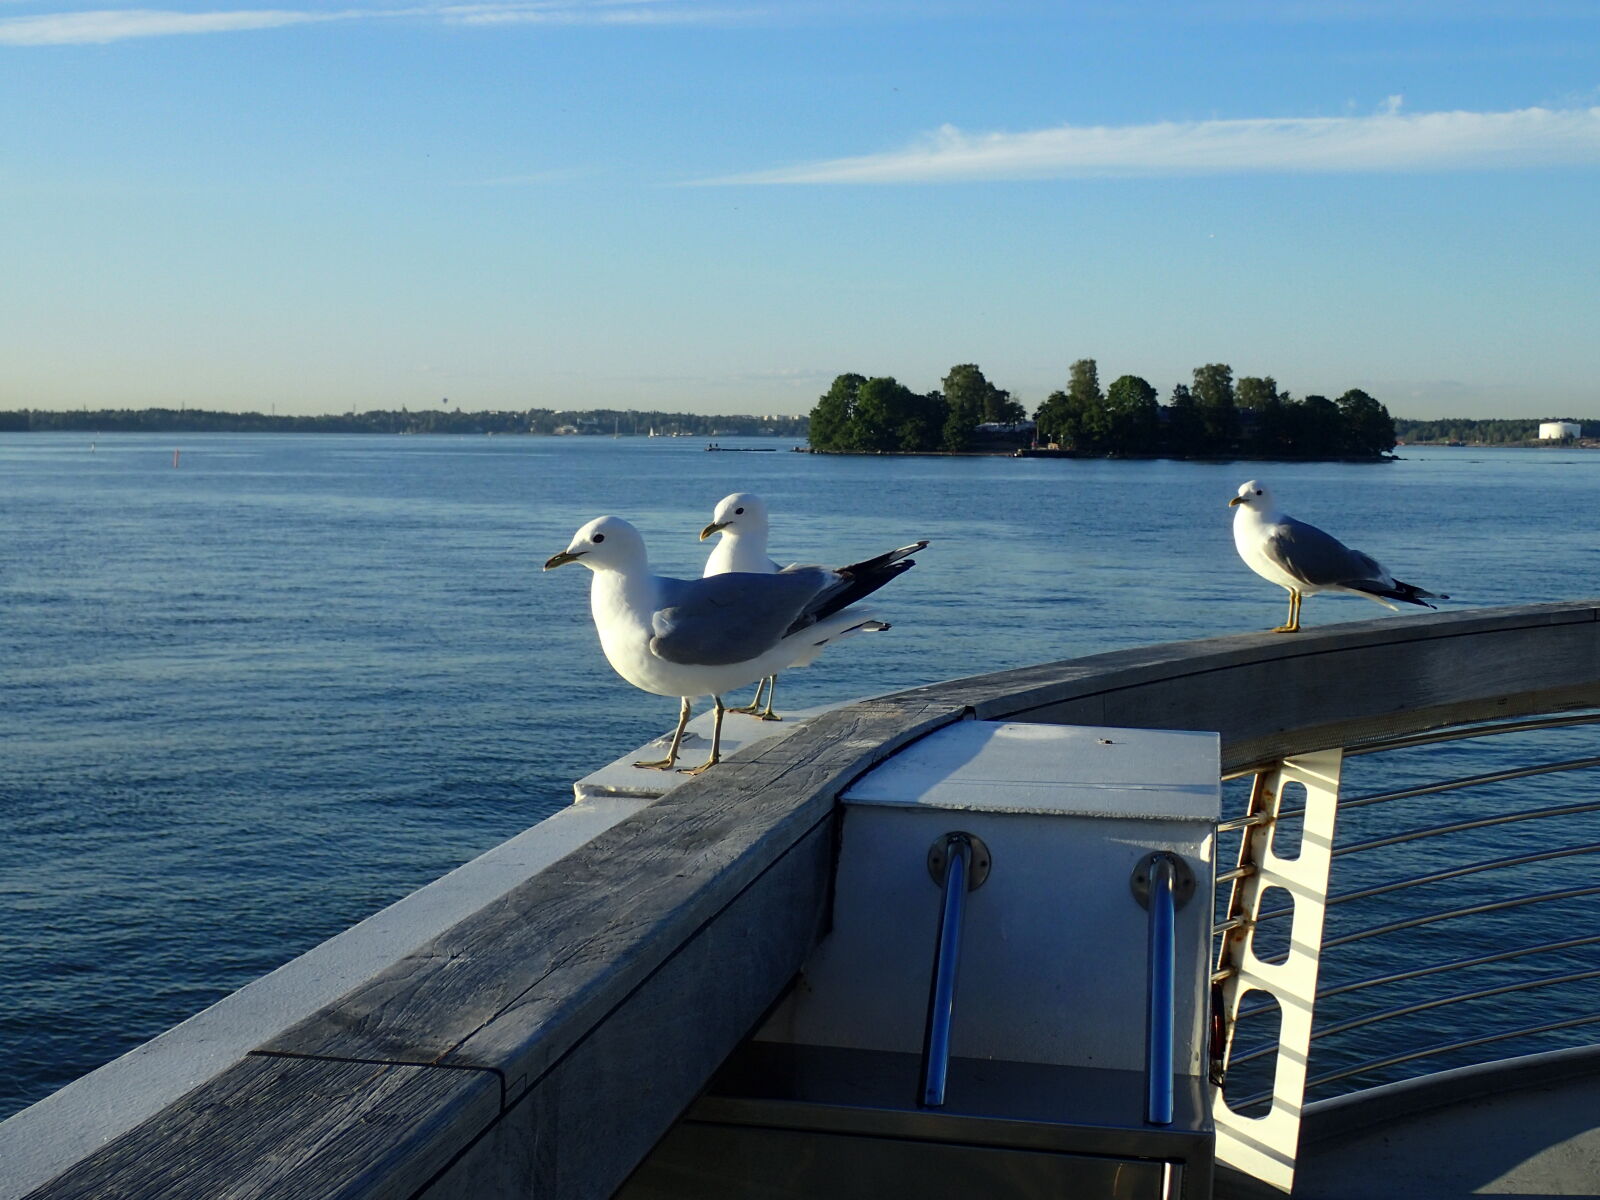 Olympus TG-3 sample photo. Seagulls are soon the photography